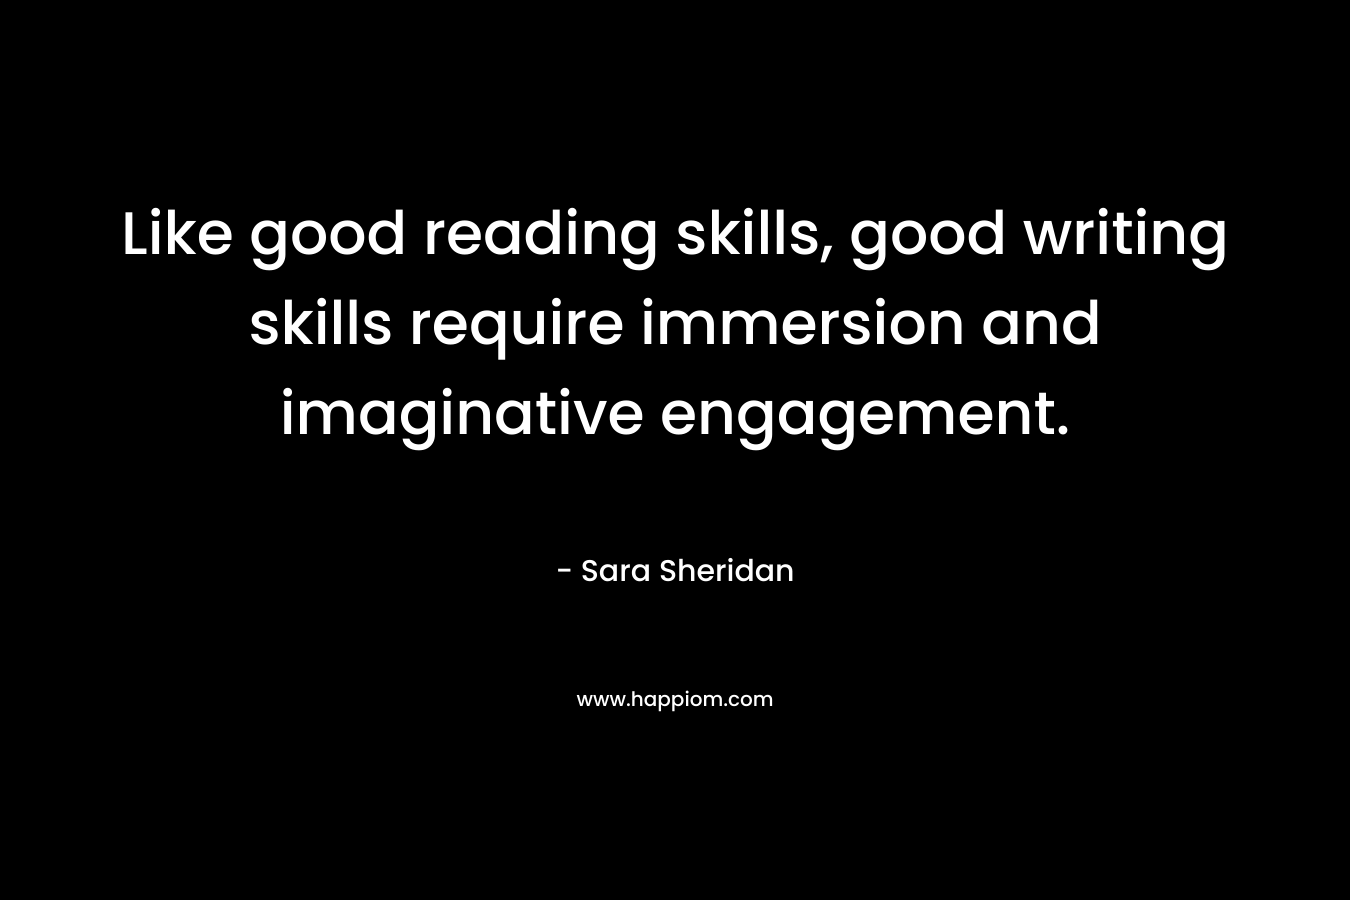 Like good reading skills, good writing skills require immersion and imaginative engagement.